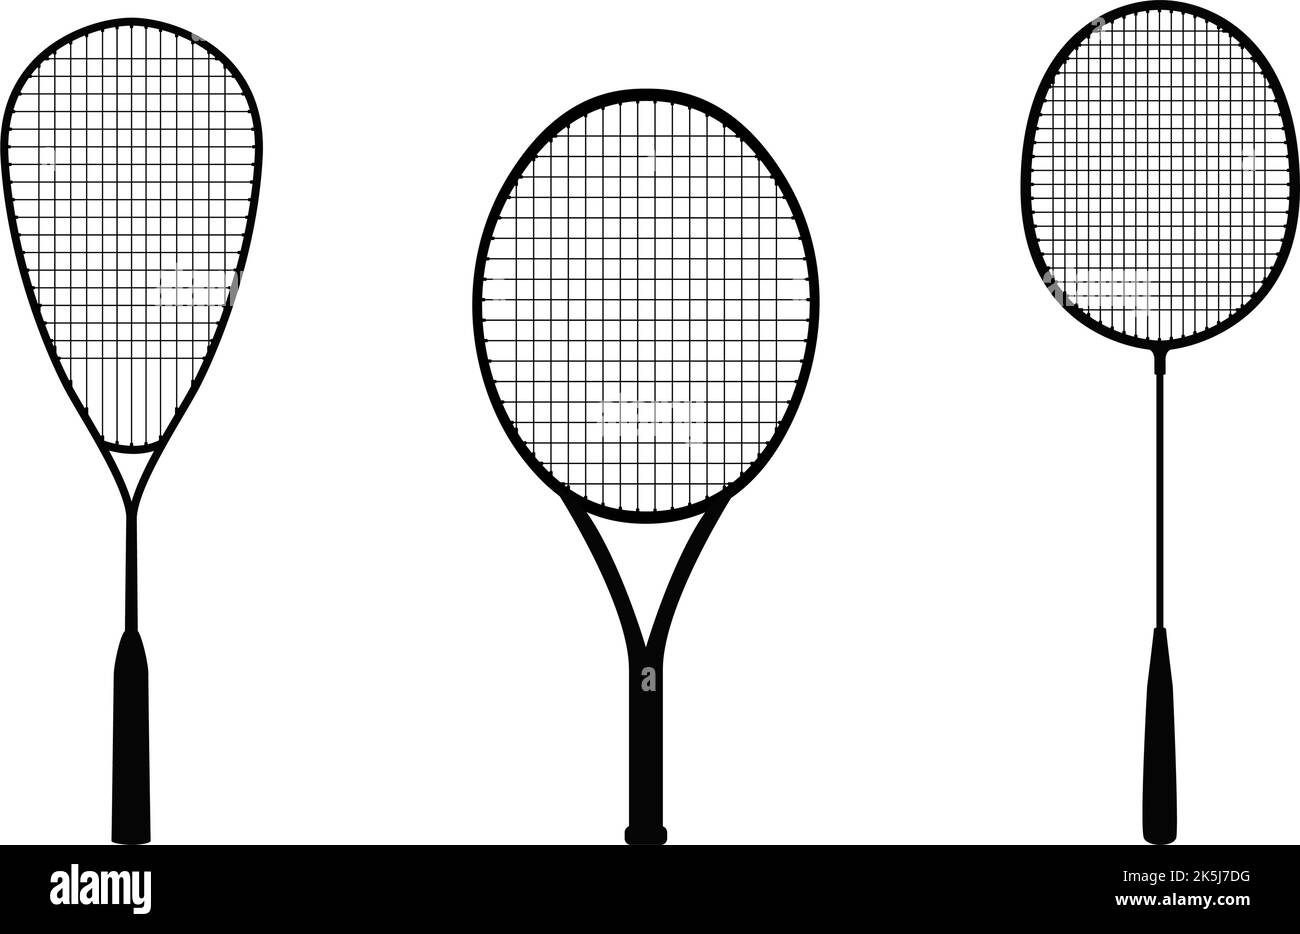 Silhouettes of squash, tennis and badminton rackets. Vector illustration Stock Vector